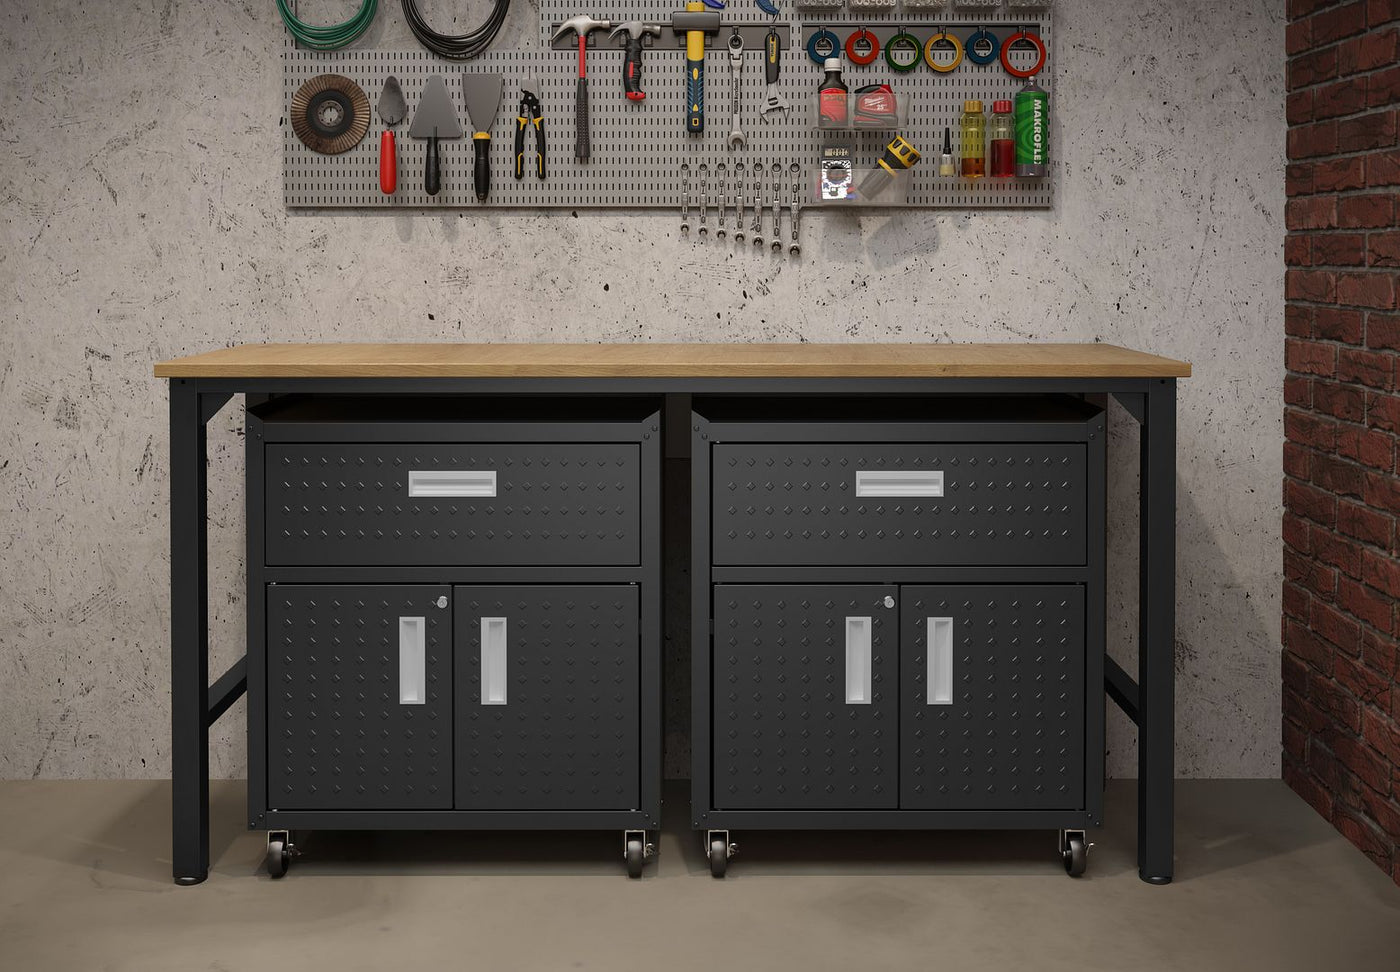 Maximus IV 3-Piece Mobile Garage Cabinet/Worktable - Charcoal Grey